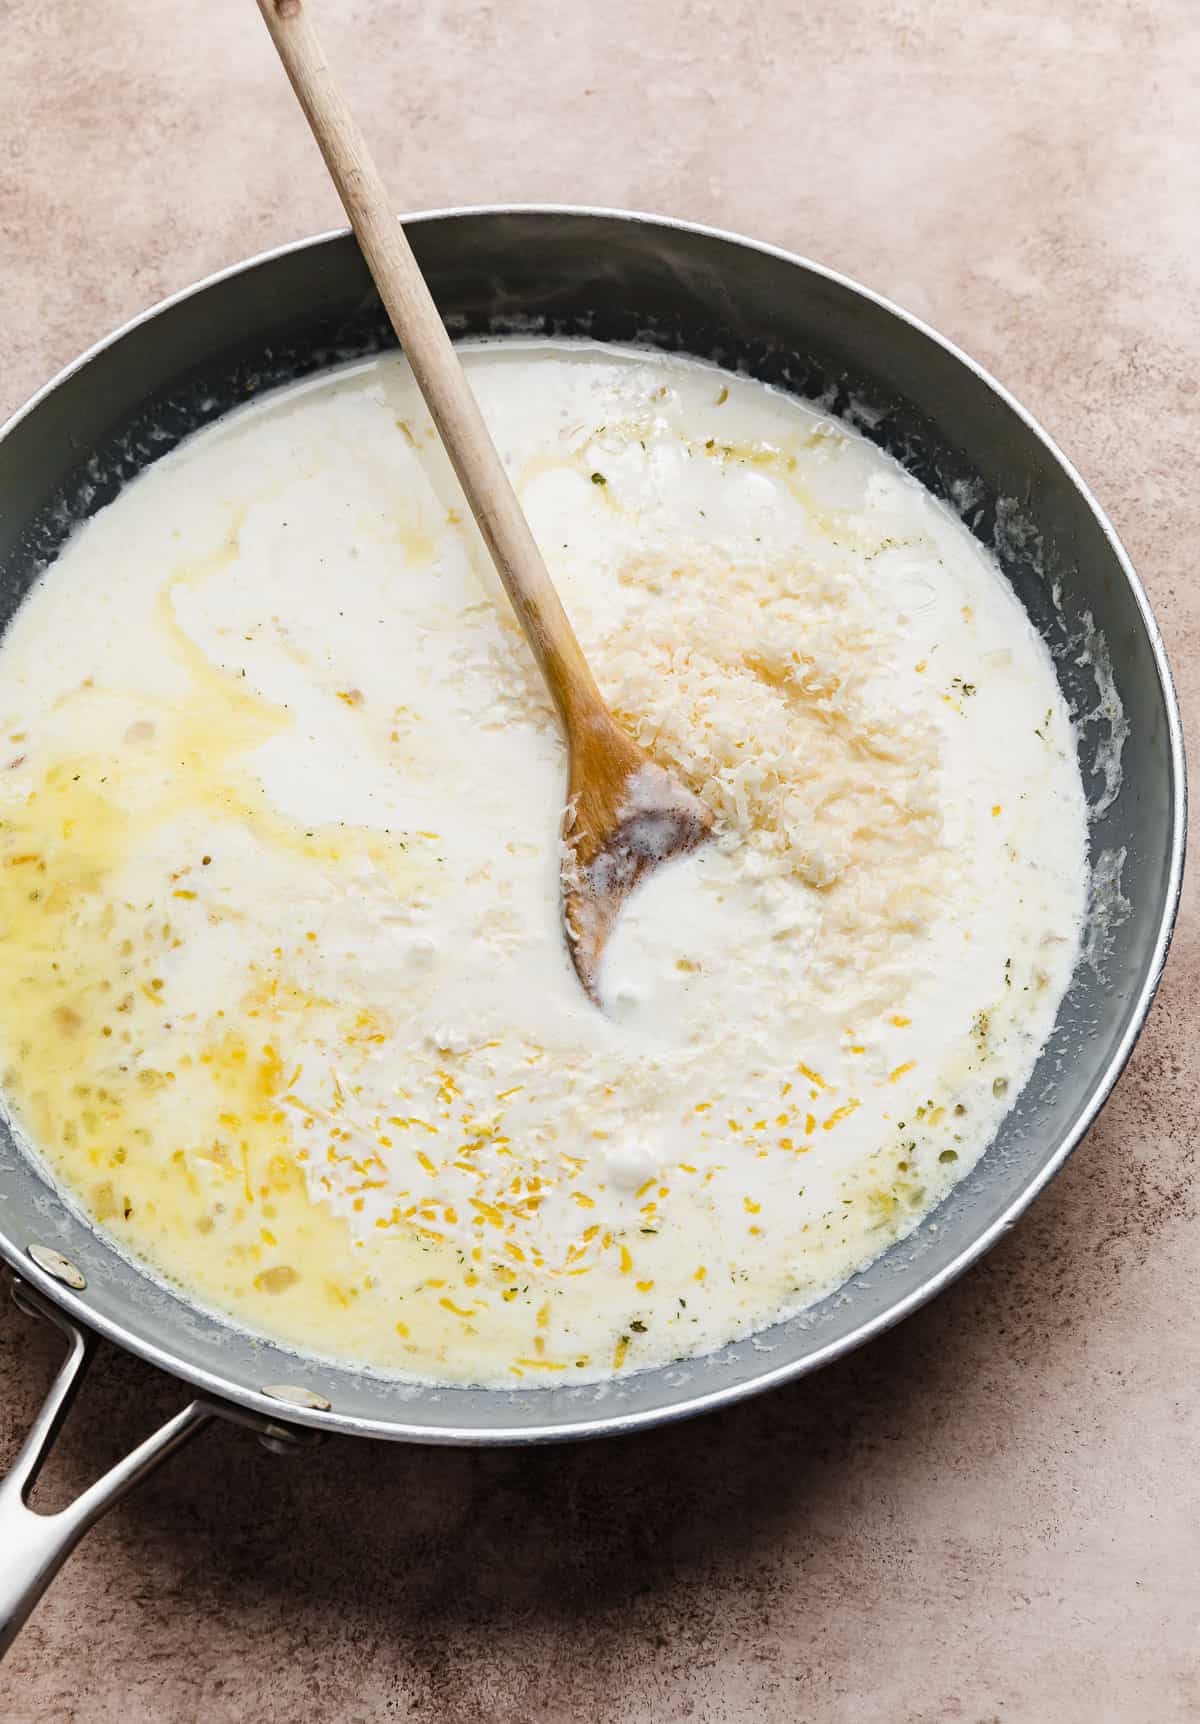 A white sauce in a grey skillet used to make a Creamy Lemon Chicken Pasta recipe.